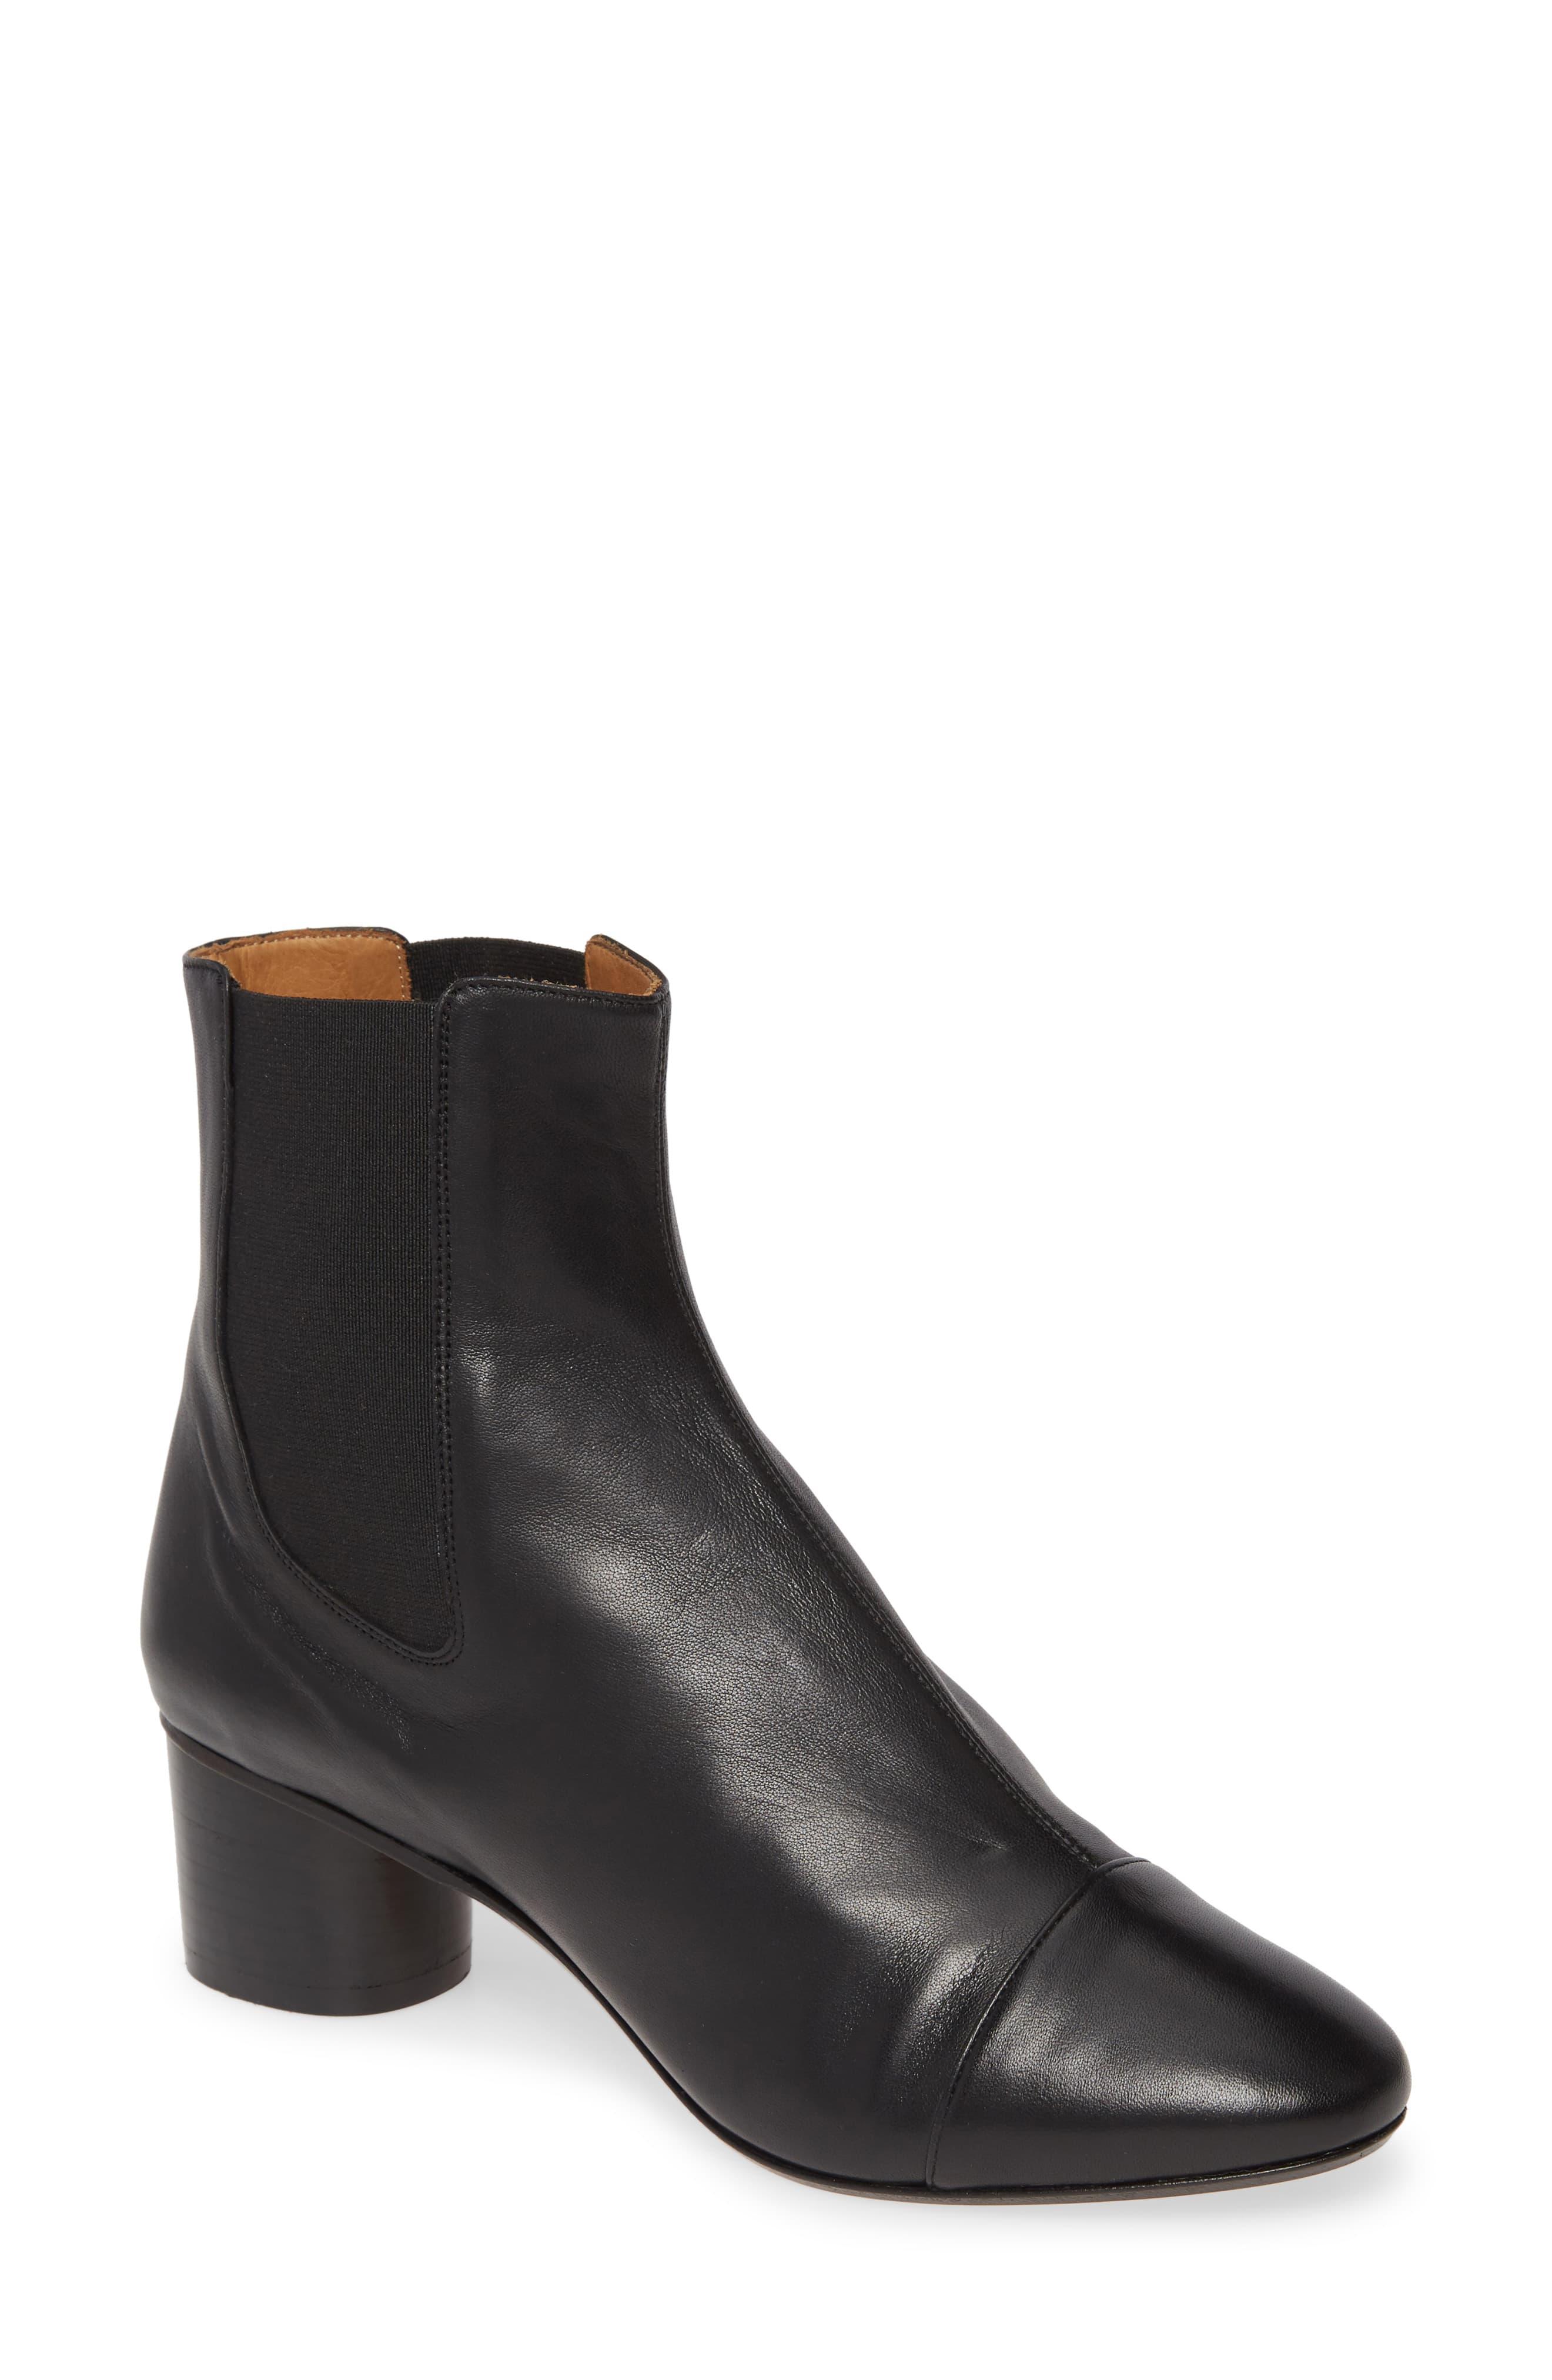 Isabel Marant Leather Chelsea Boot in Black Leather (Brown) - Lyst